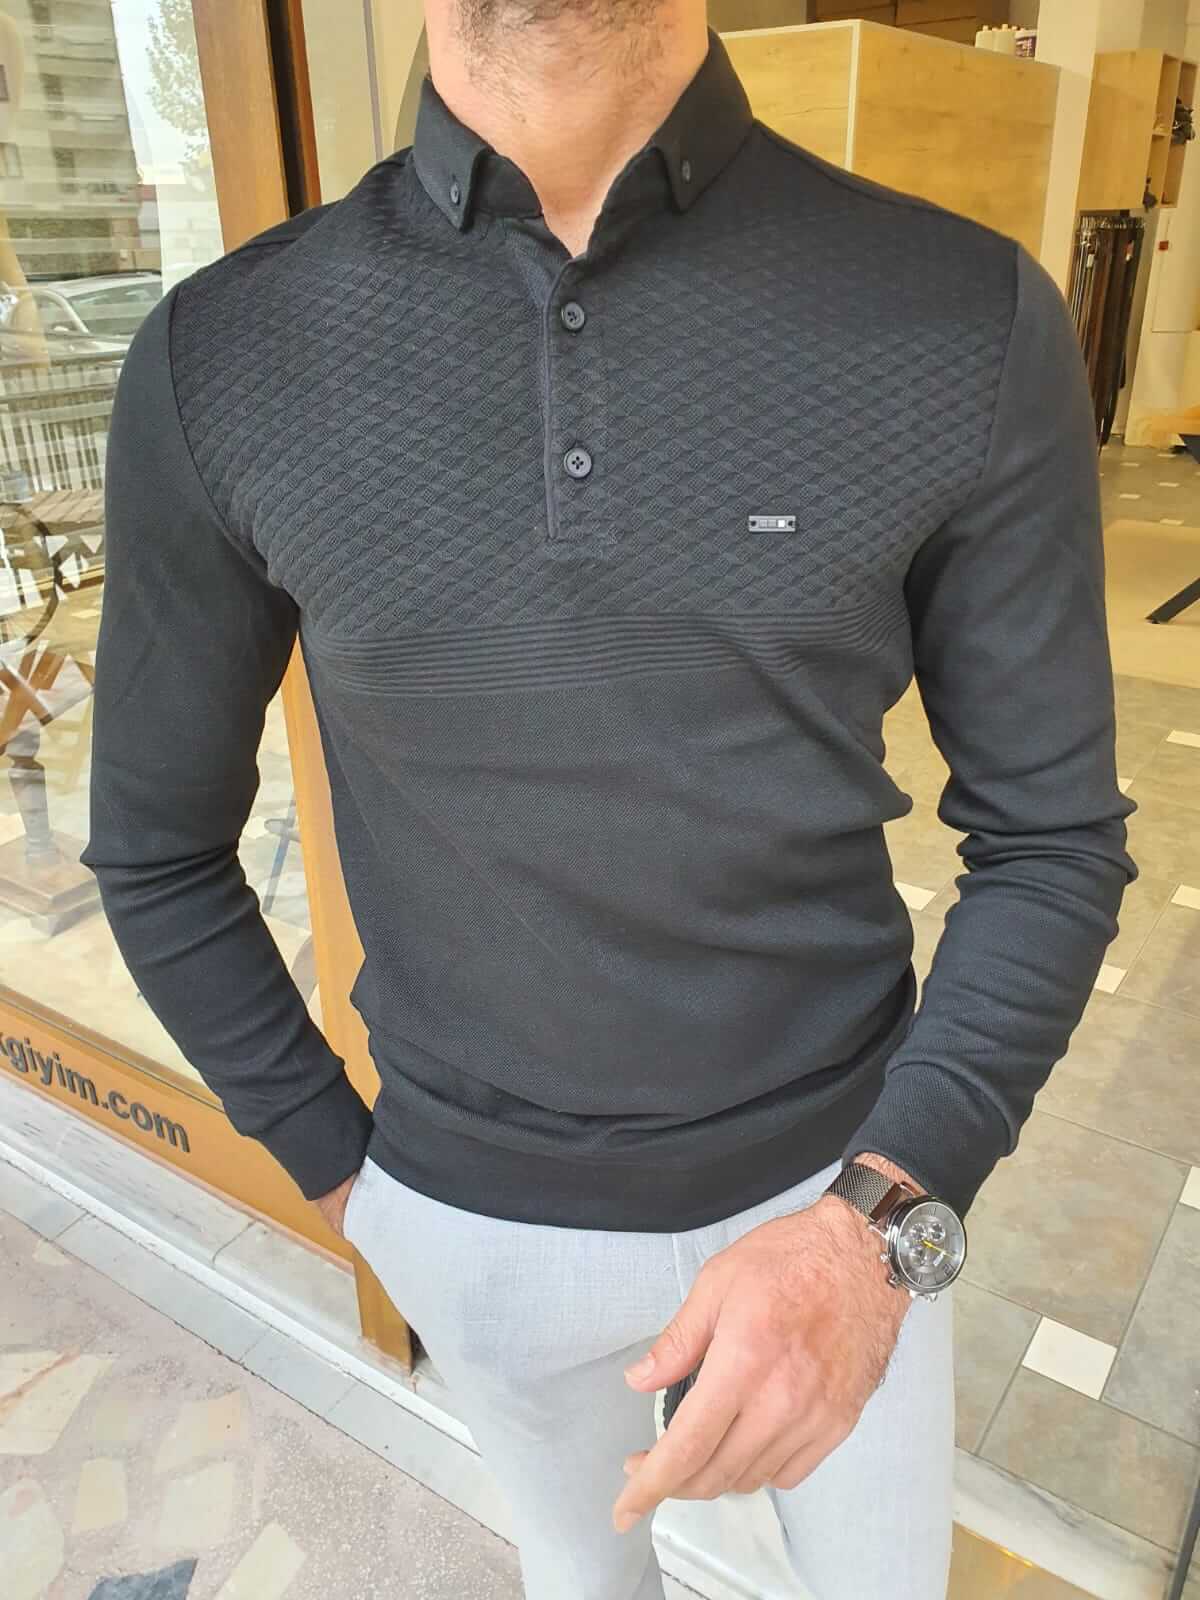 A black long sleeve combed knitwear, featuring a textured pattern and a cozy, comfortable fit.